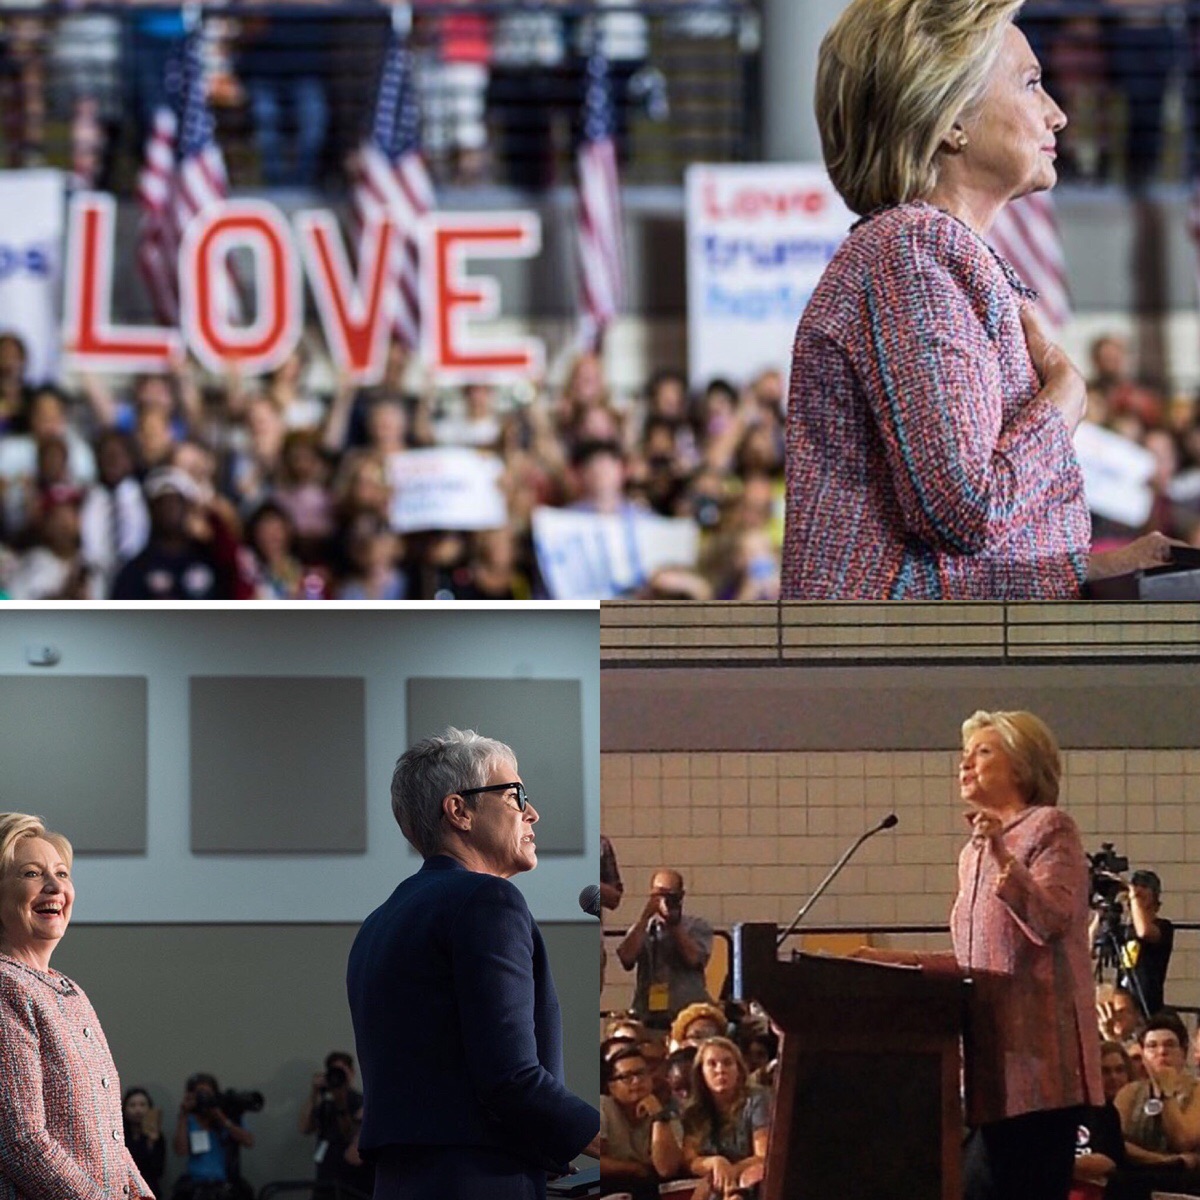 After searching countless HRC tags on Instagram, I only managed to find these 3 unique photos from her event in NC. Proof that they photoshopped the crowd in the photo on top.